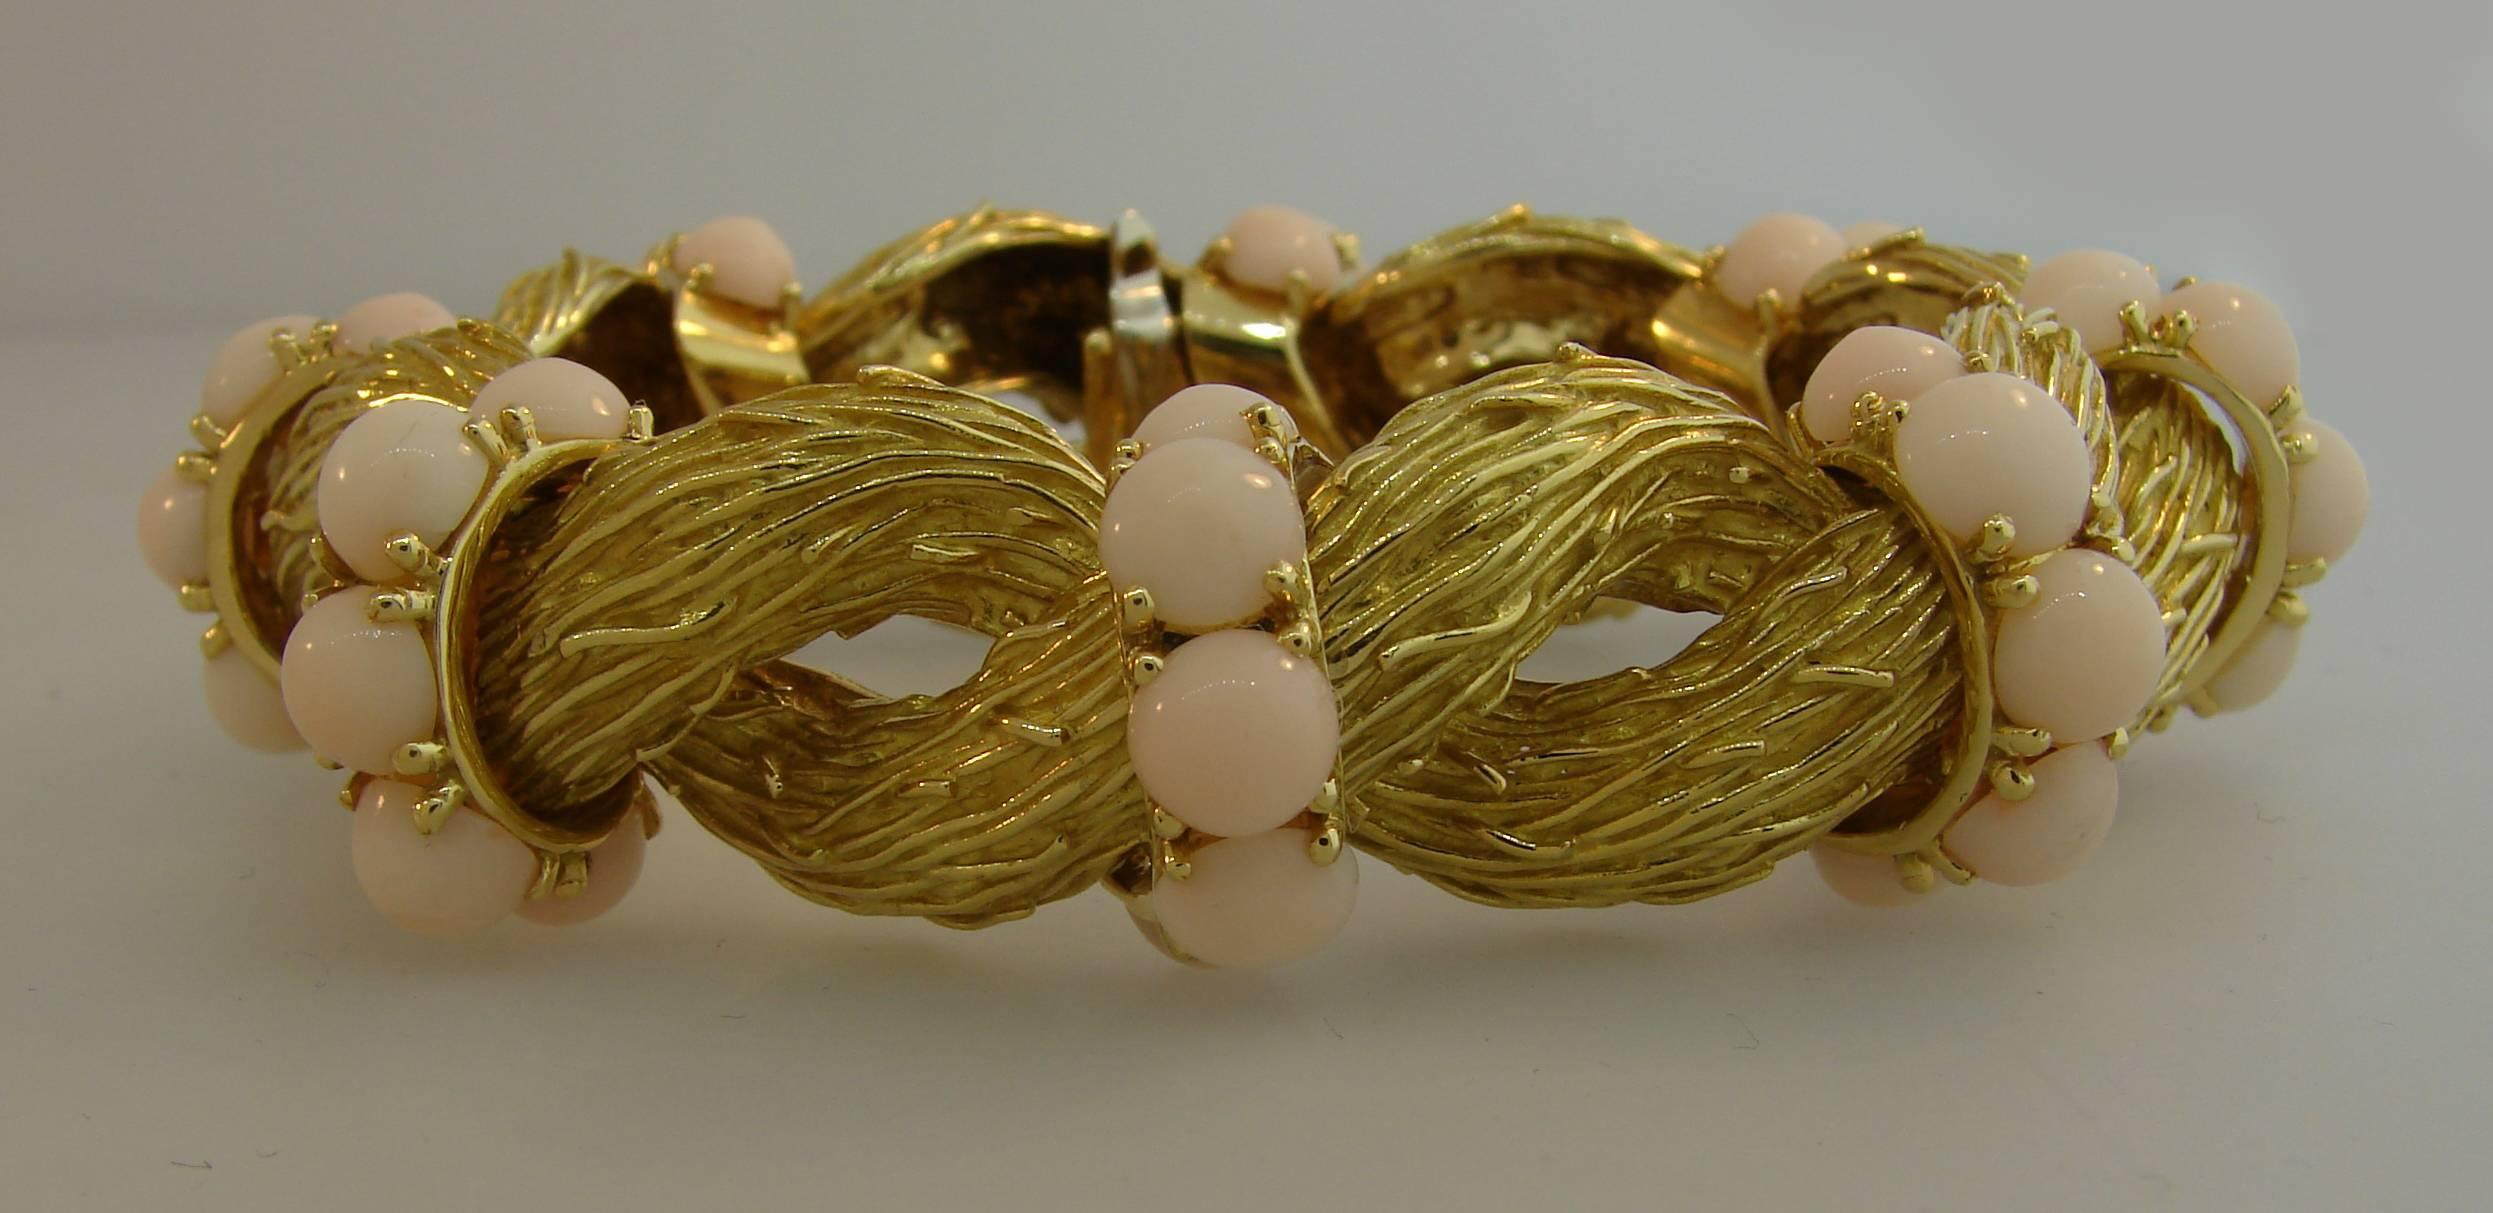 Nice and substantial bracelet created by Italian jewelry house Pomellato in the 1950's. Chic, stylish and wearable piece that is a great addition to your jewelry collection!
The bracelet is made of 18 karat yellow and accented with angel skin coral